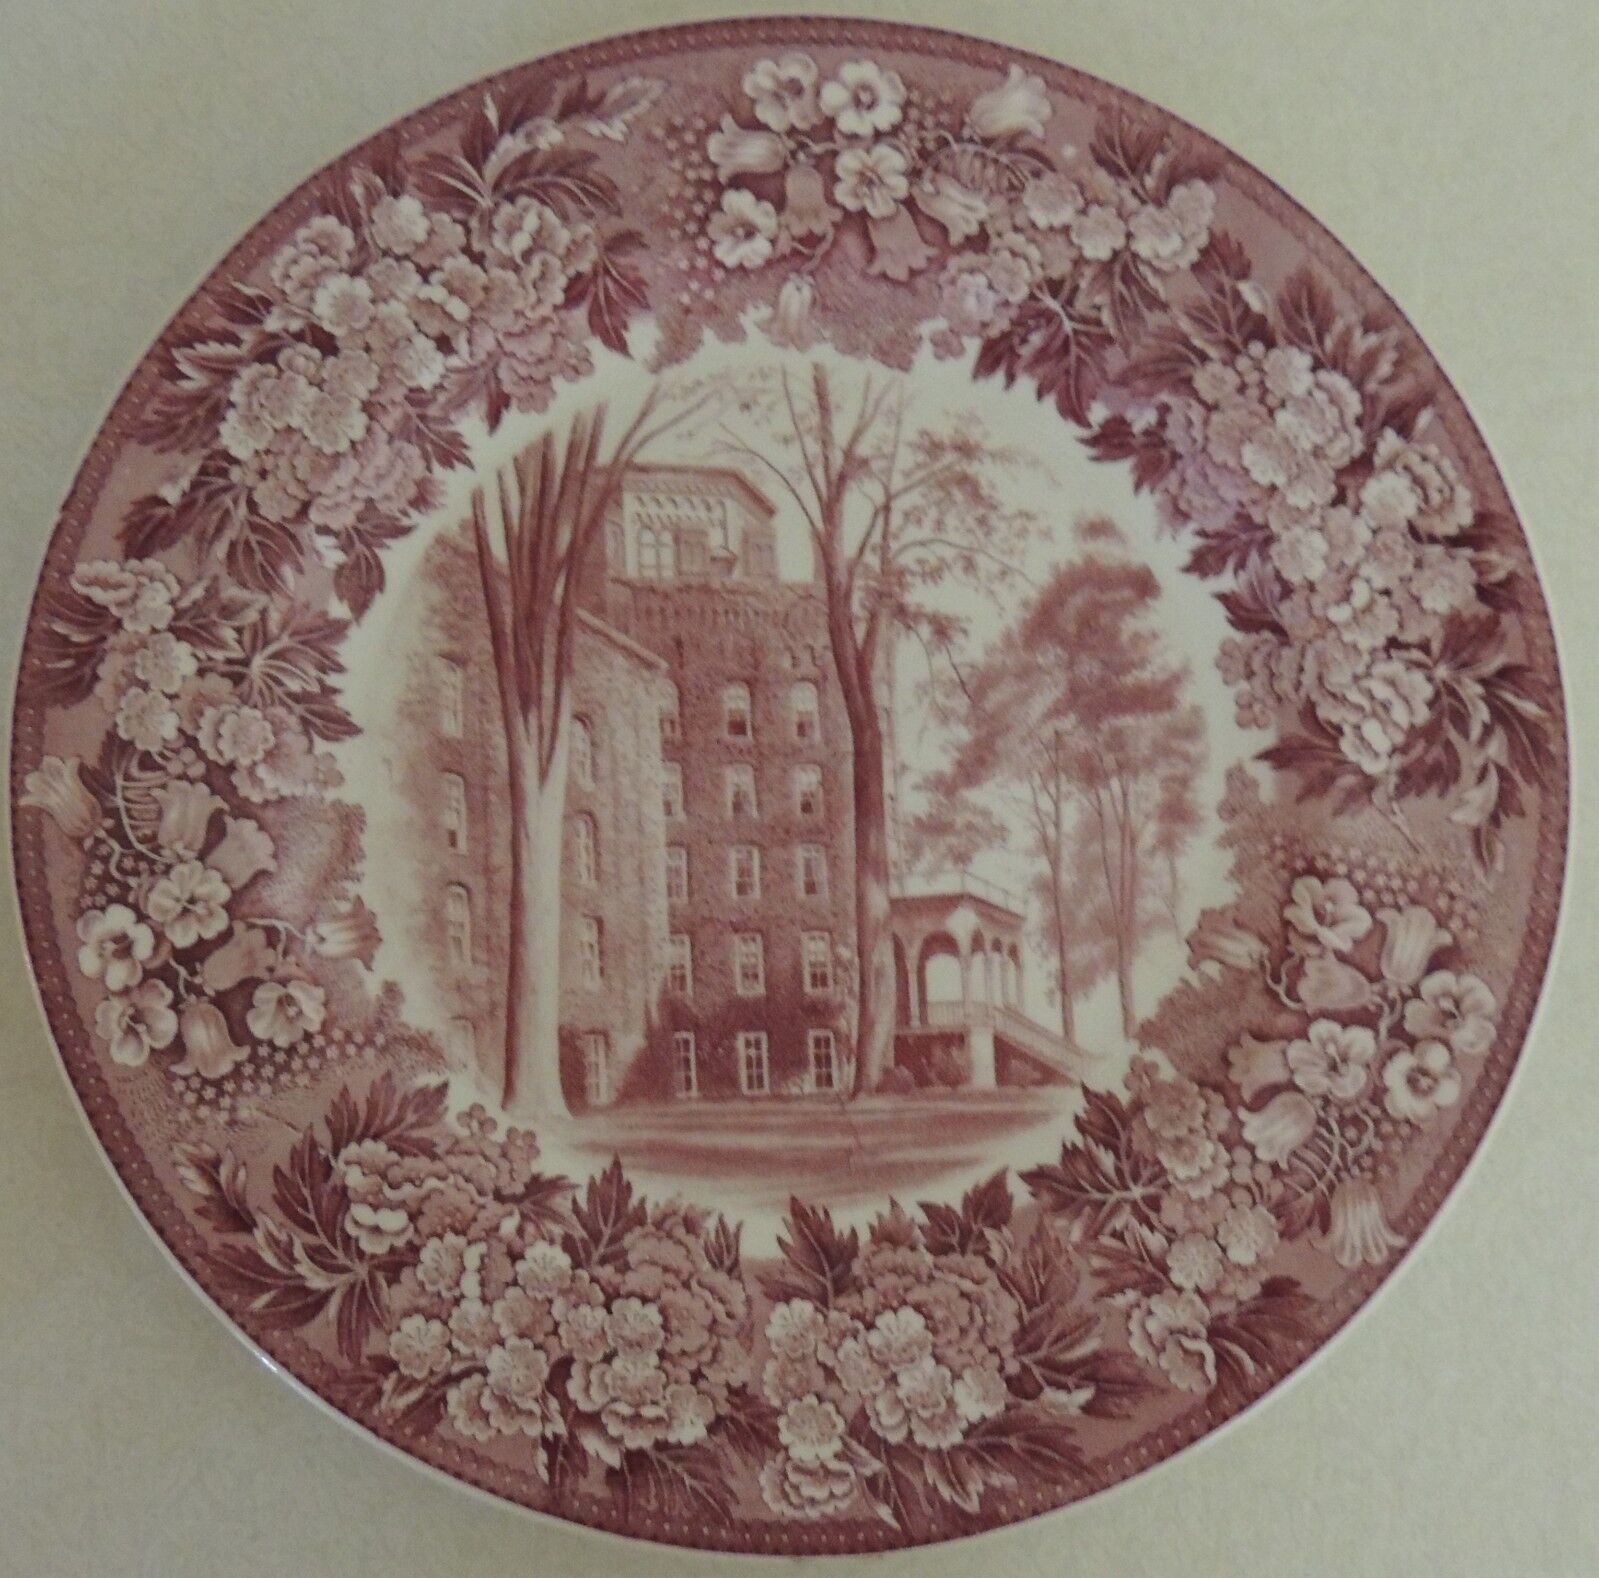 ELMIRA COLLEGE Ivy-Cowles Hall Vintage Commemorative Plate WEDGWOOD Pink & White